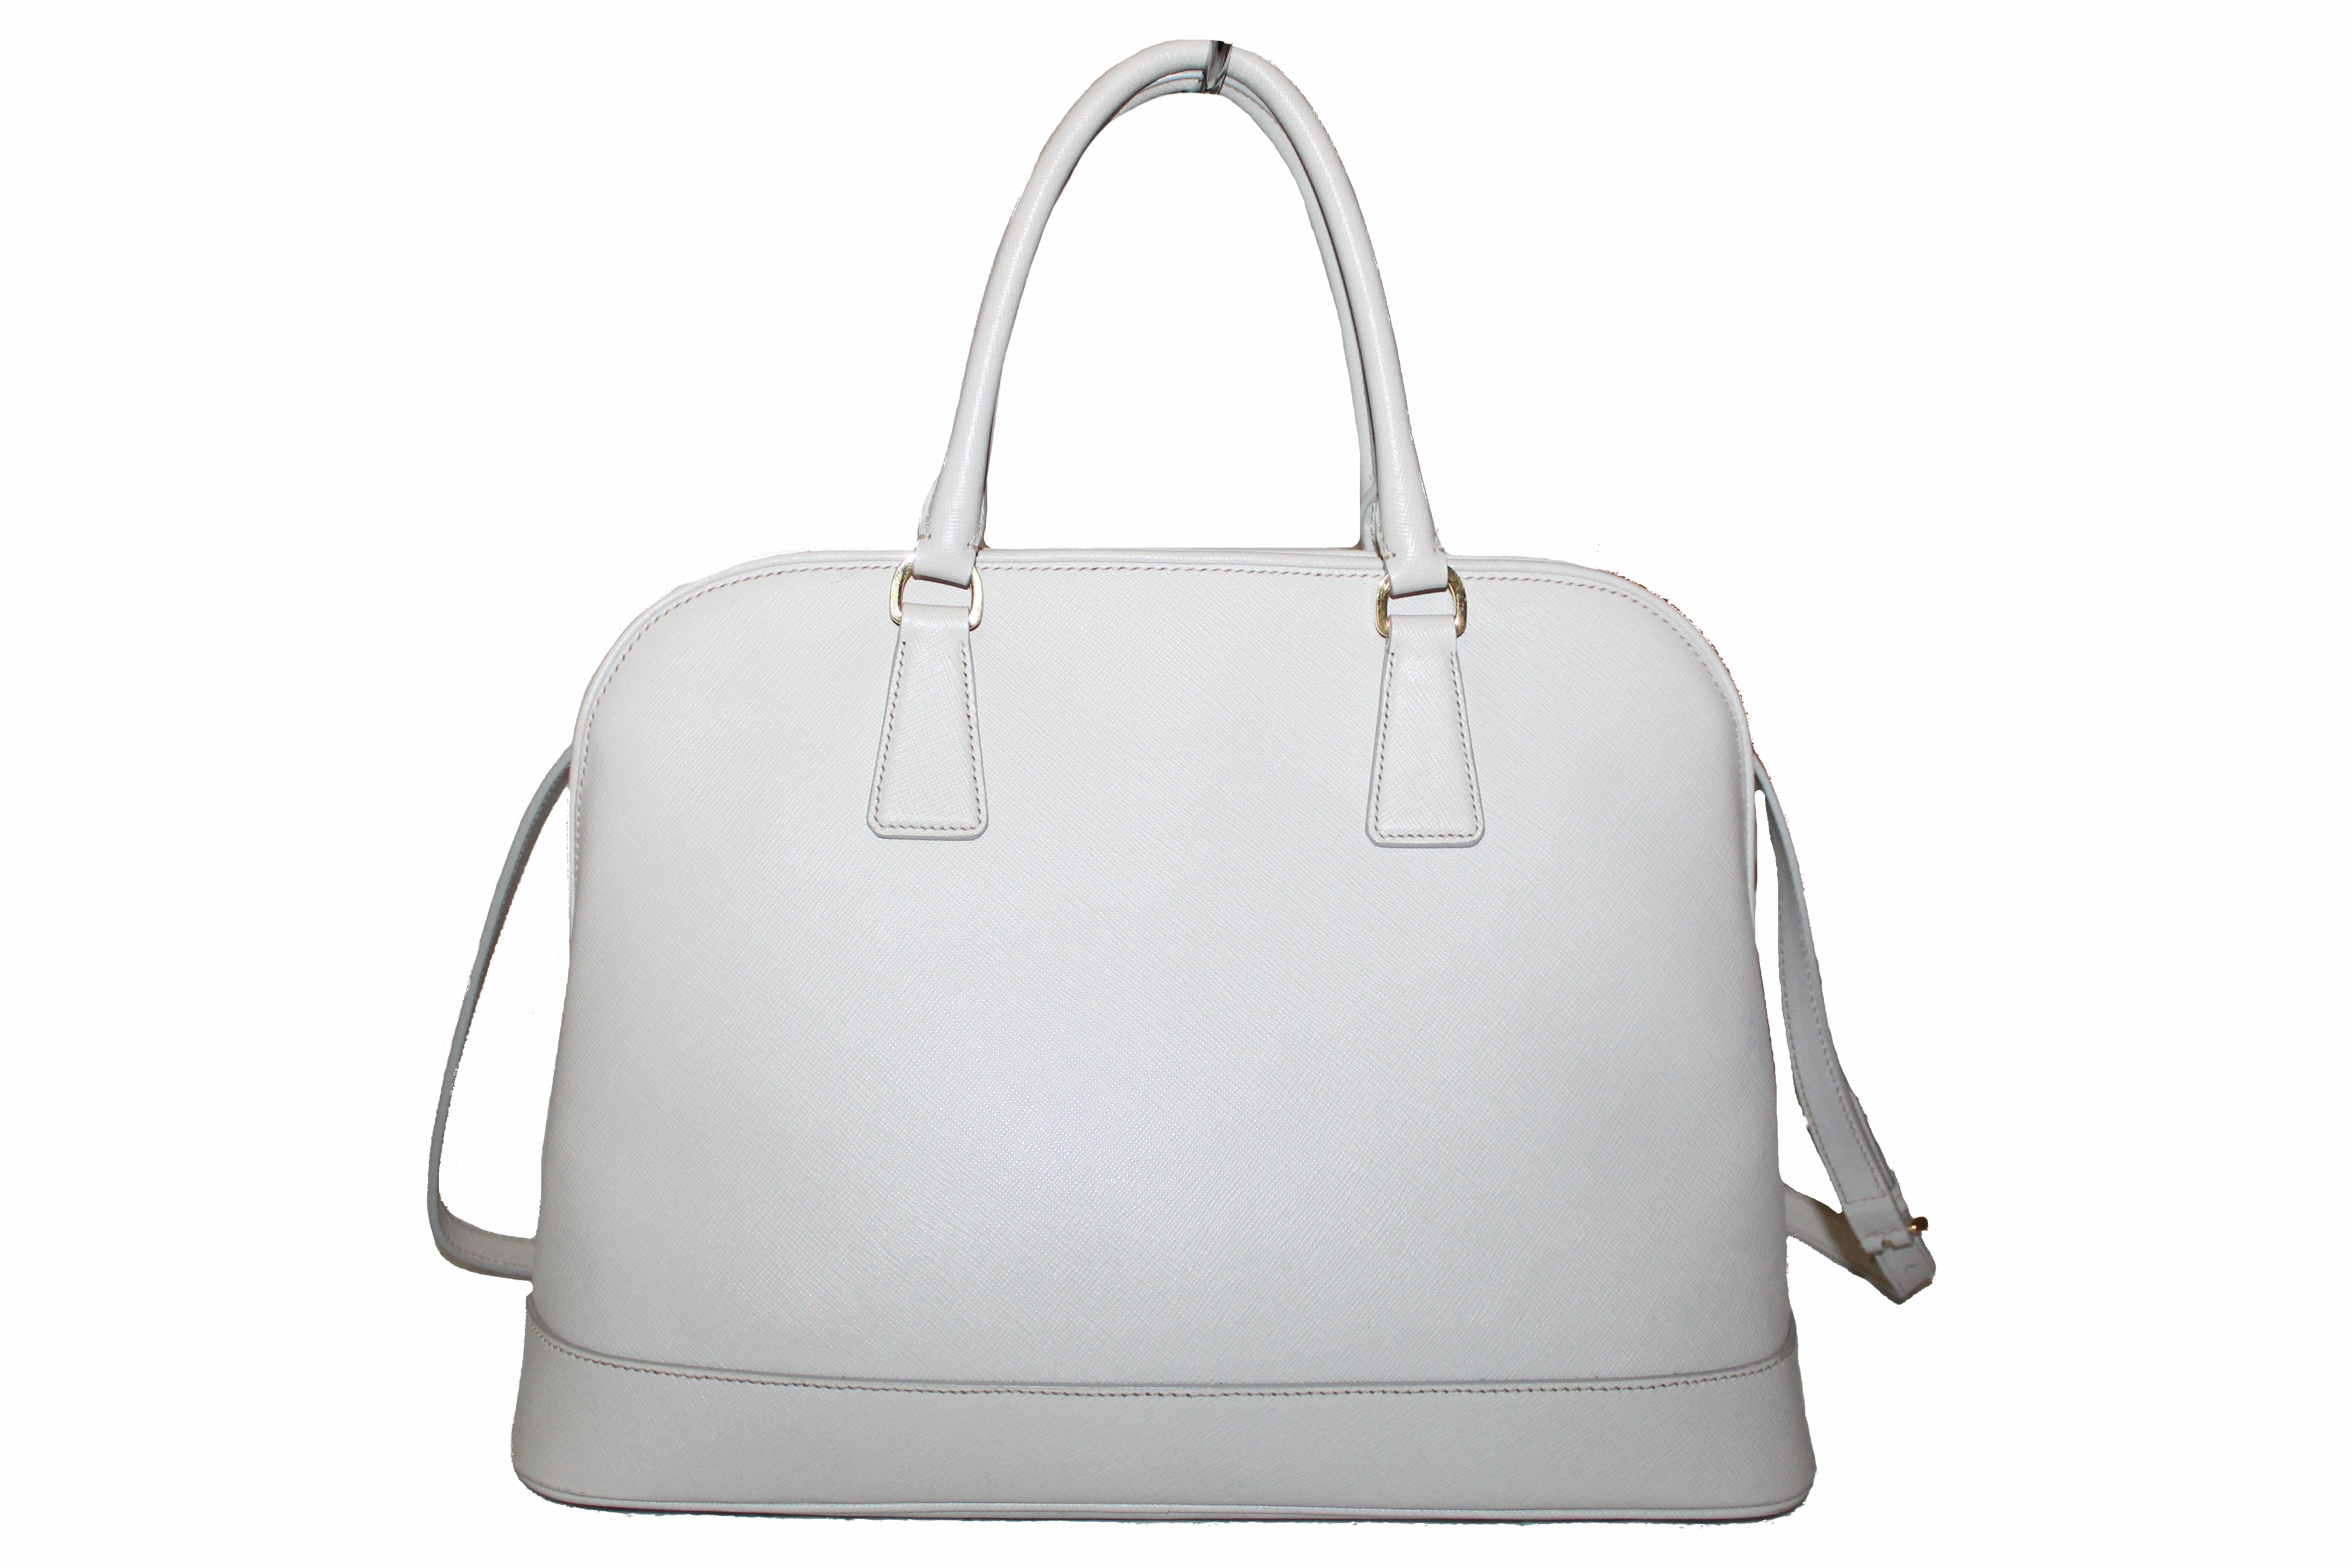 Authentic Prada White Saffiano Lux Leather Double Handle Large Tote Bag